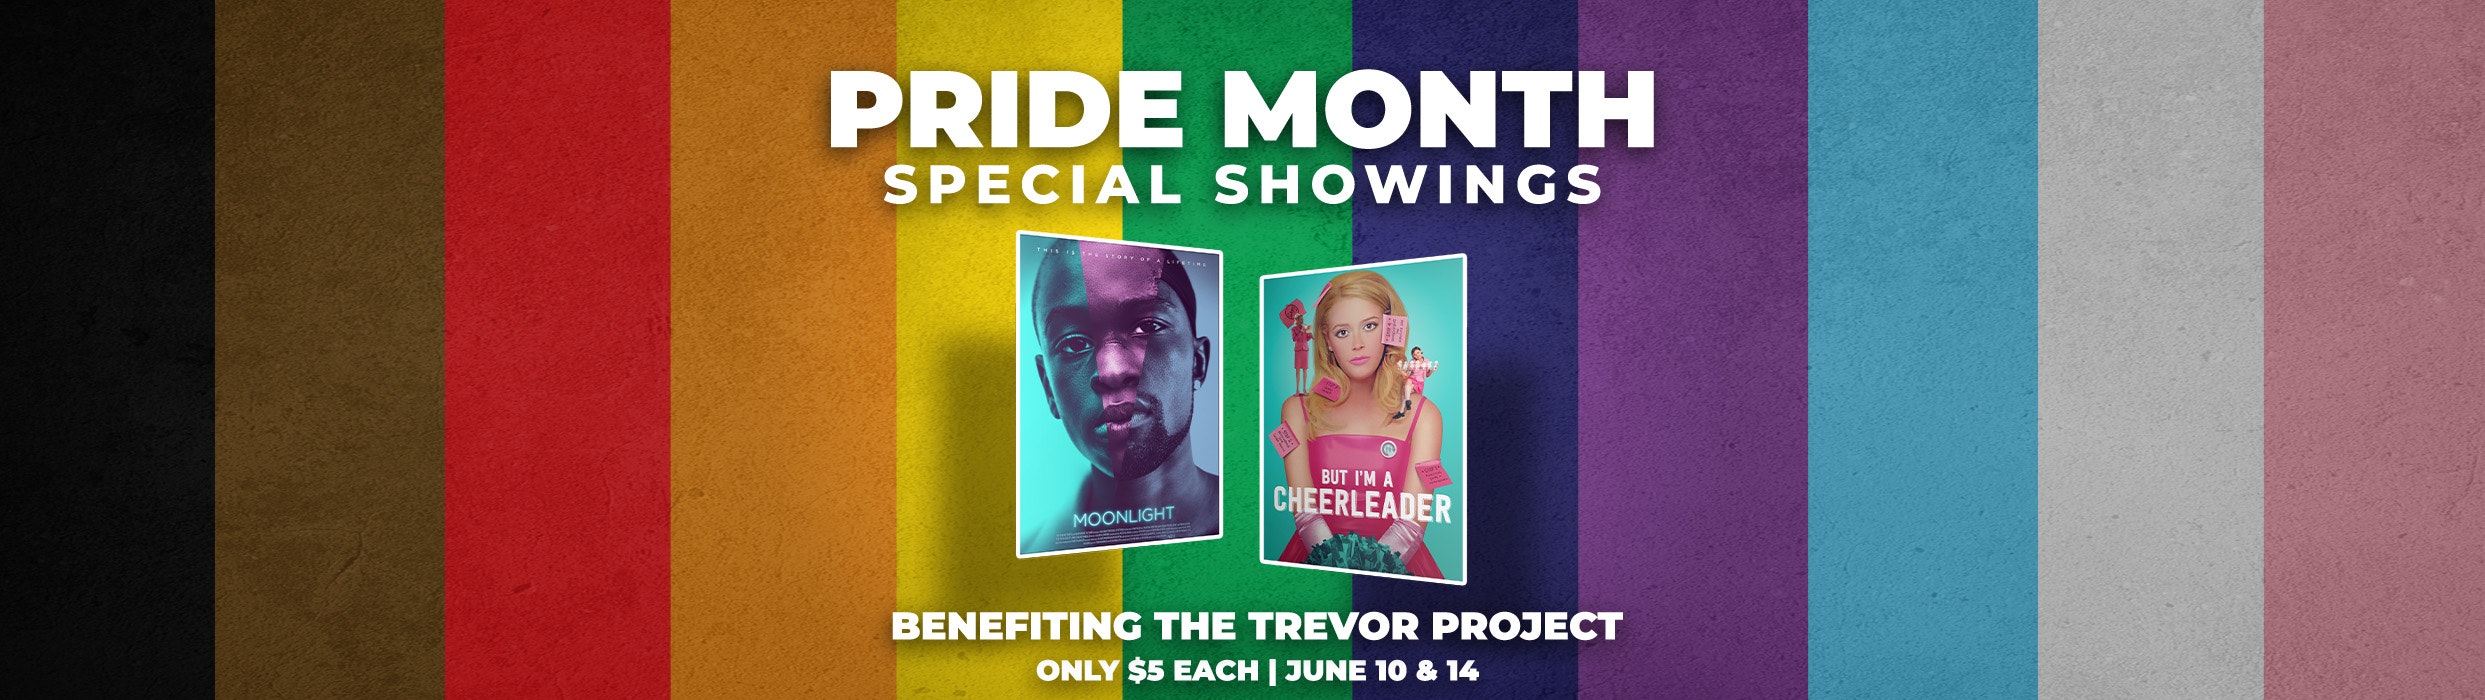 Celebrate LGBTQIA+ stories back on the BIG screen with $5 tickets and all proceeds being donated to The Trevor Project. Don't miss "But I'm a Cheerleader" and "Moonlight" playing at select Harkins from June 10 to June 14.